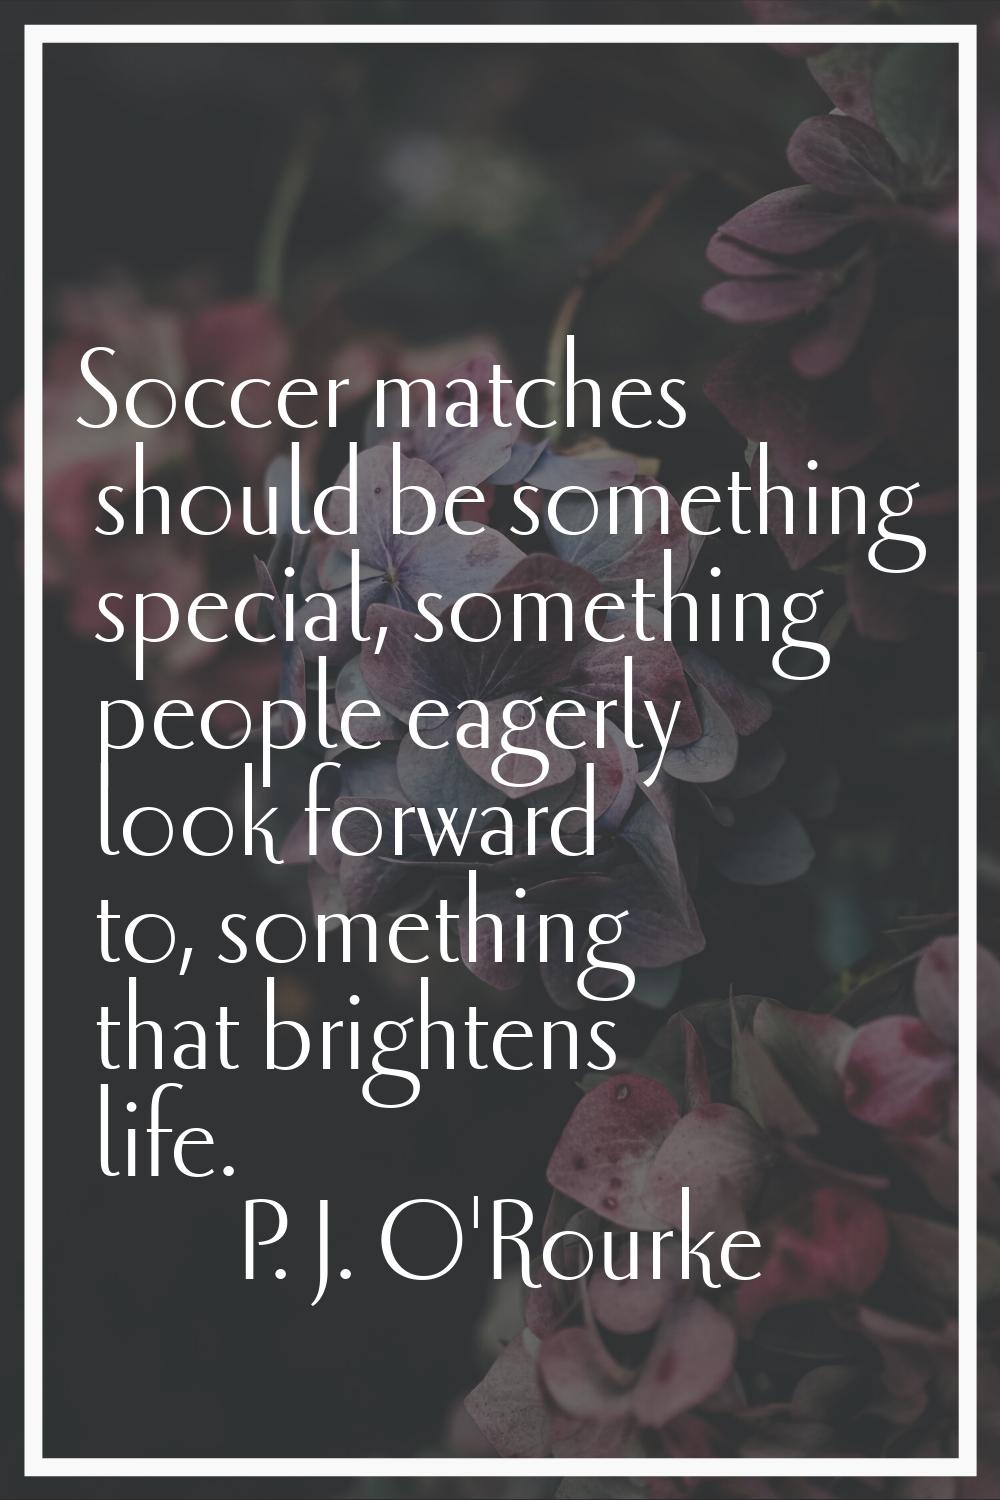 Soccer matches should be something special, something people eagerly look forward to, something tha